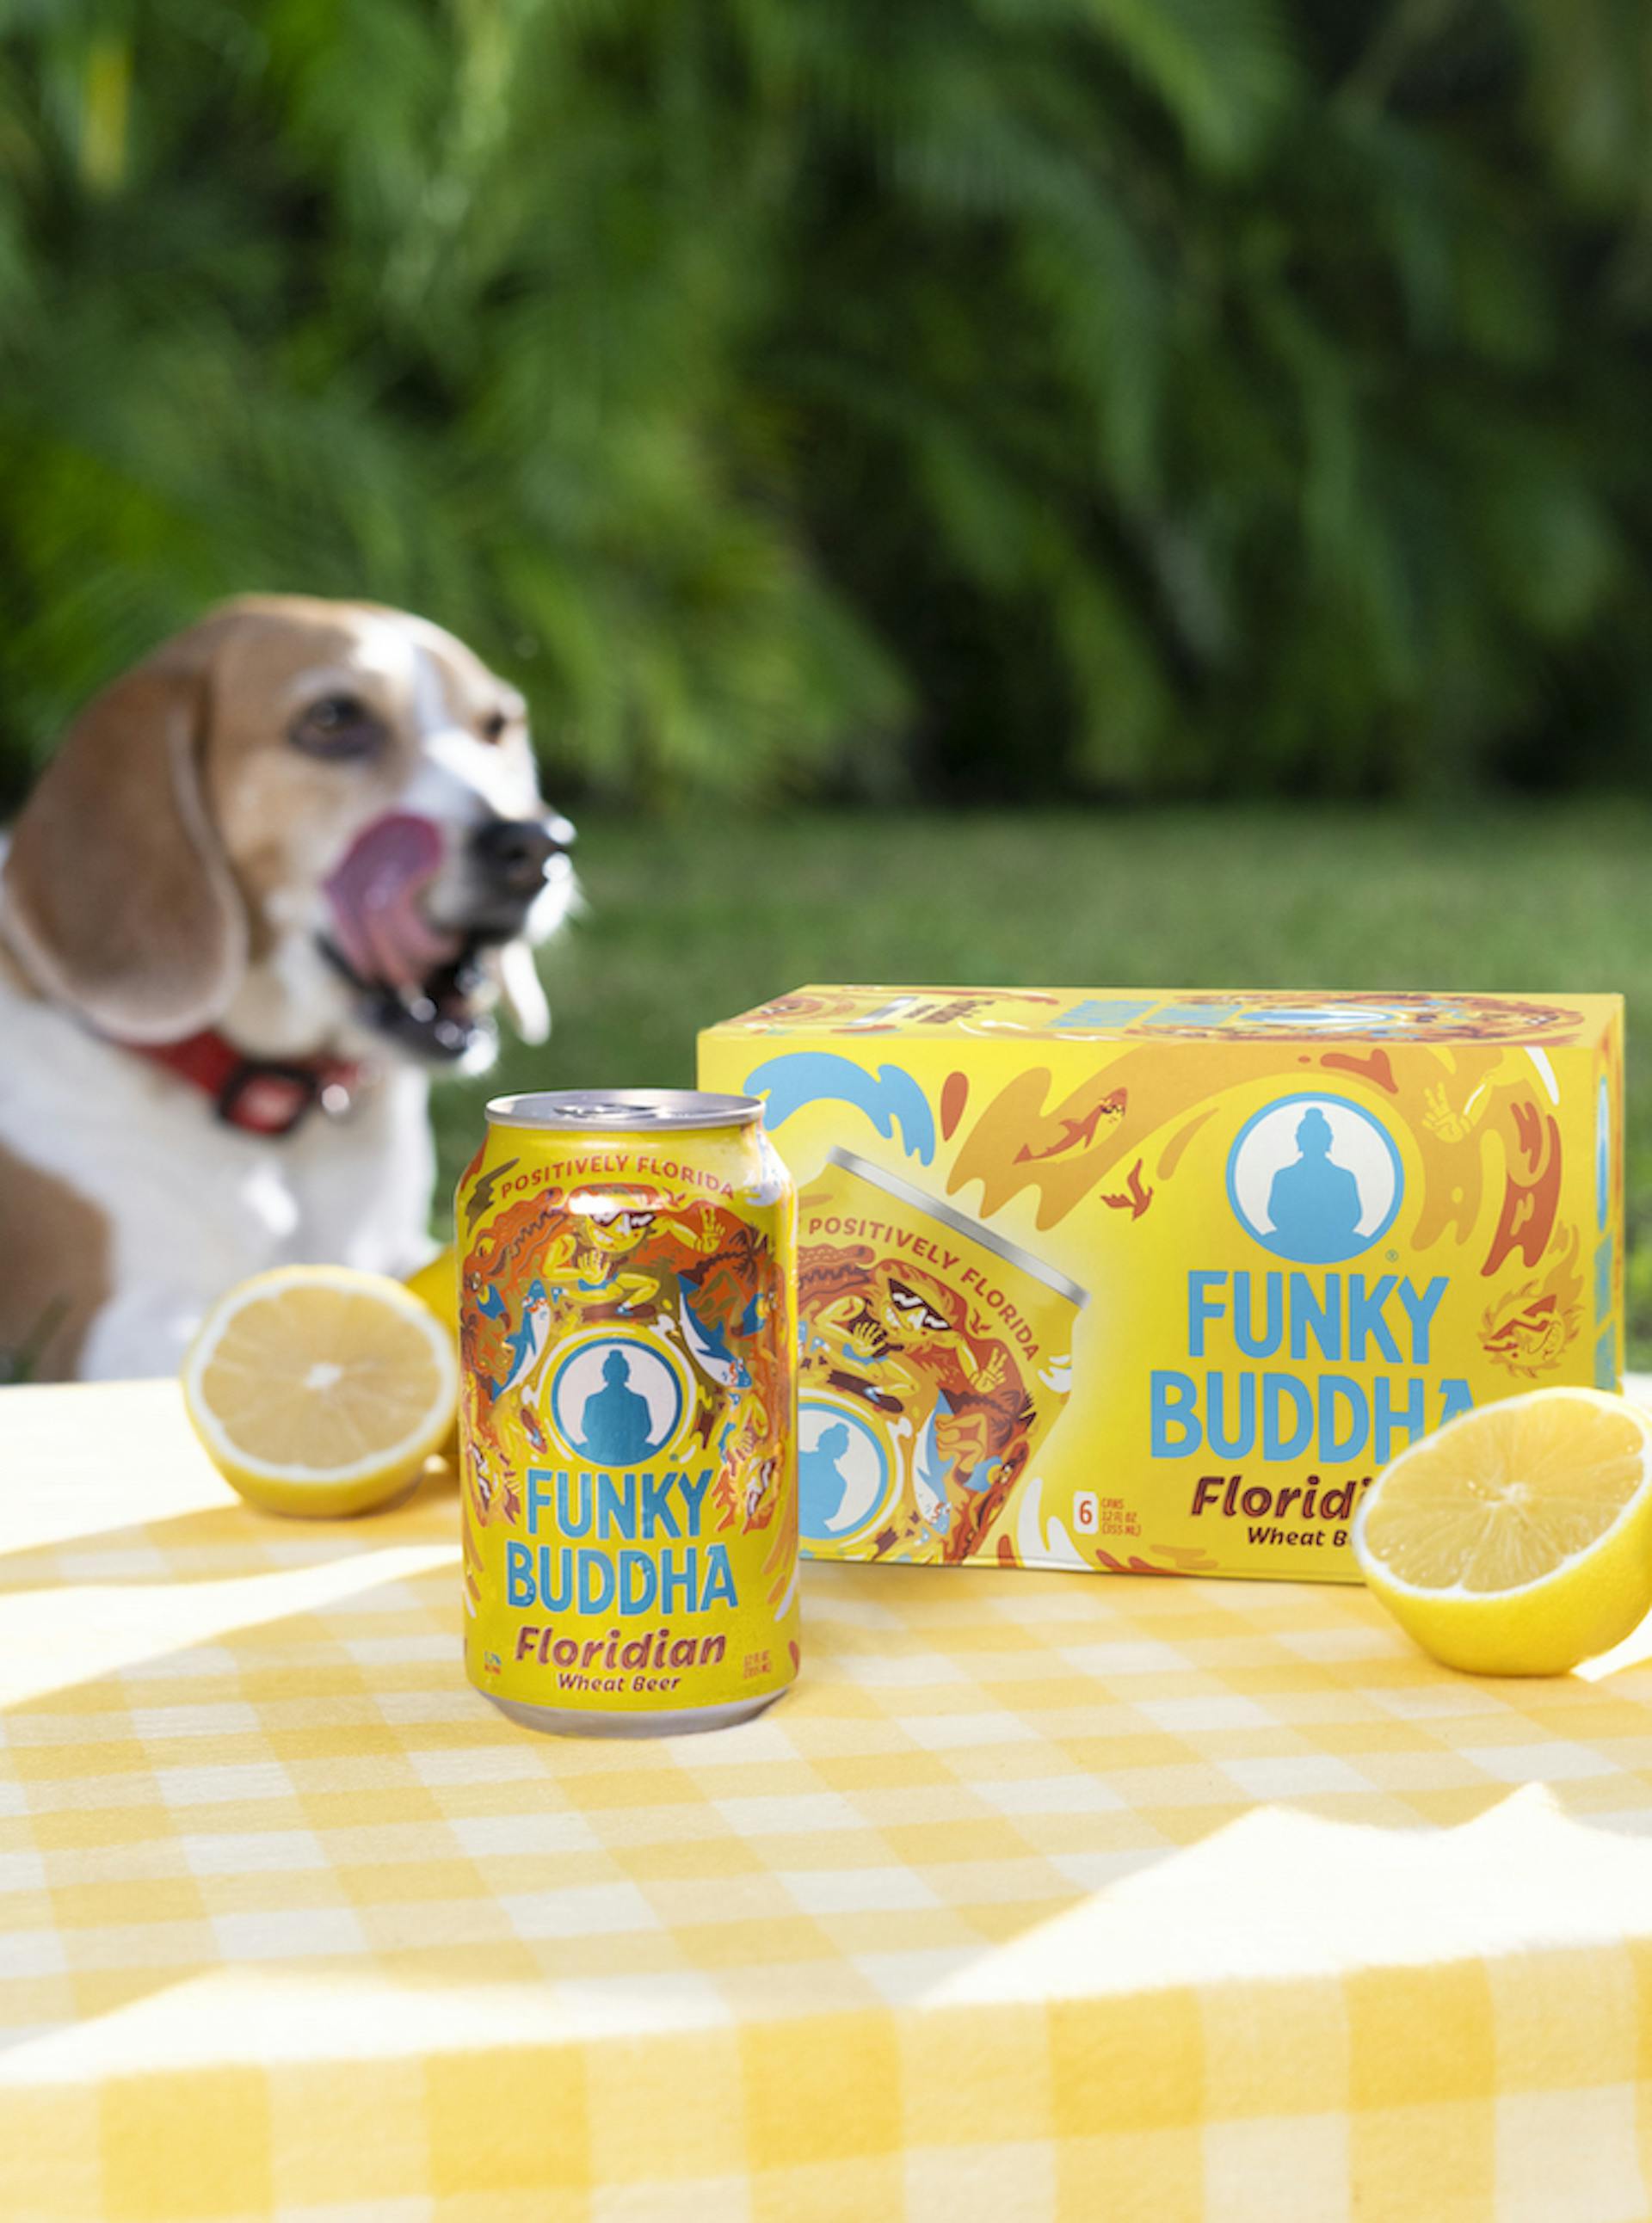 Funky Buddha Floridian Wheat Beer with a dog